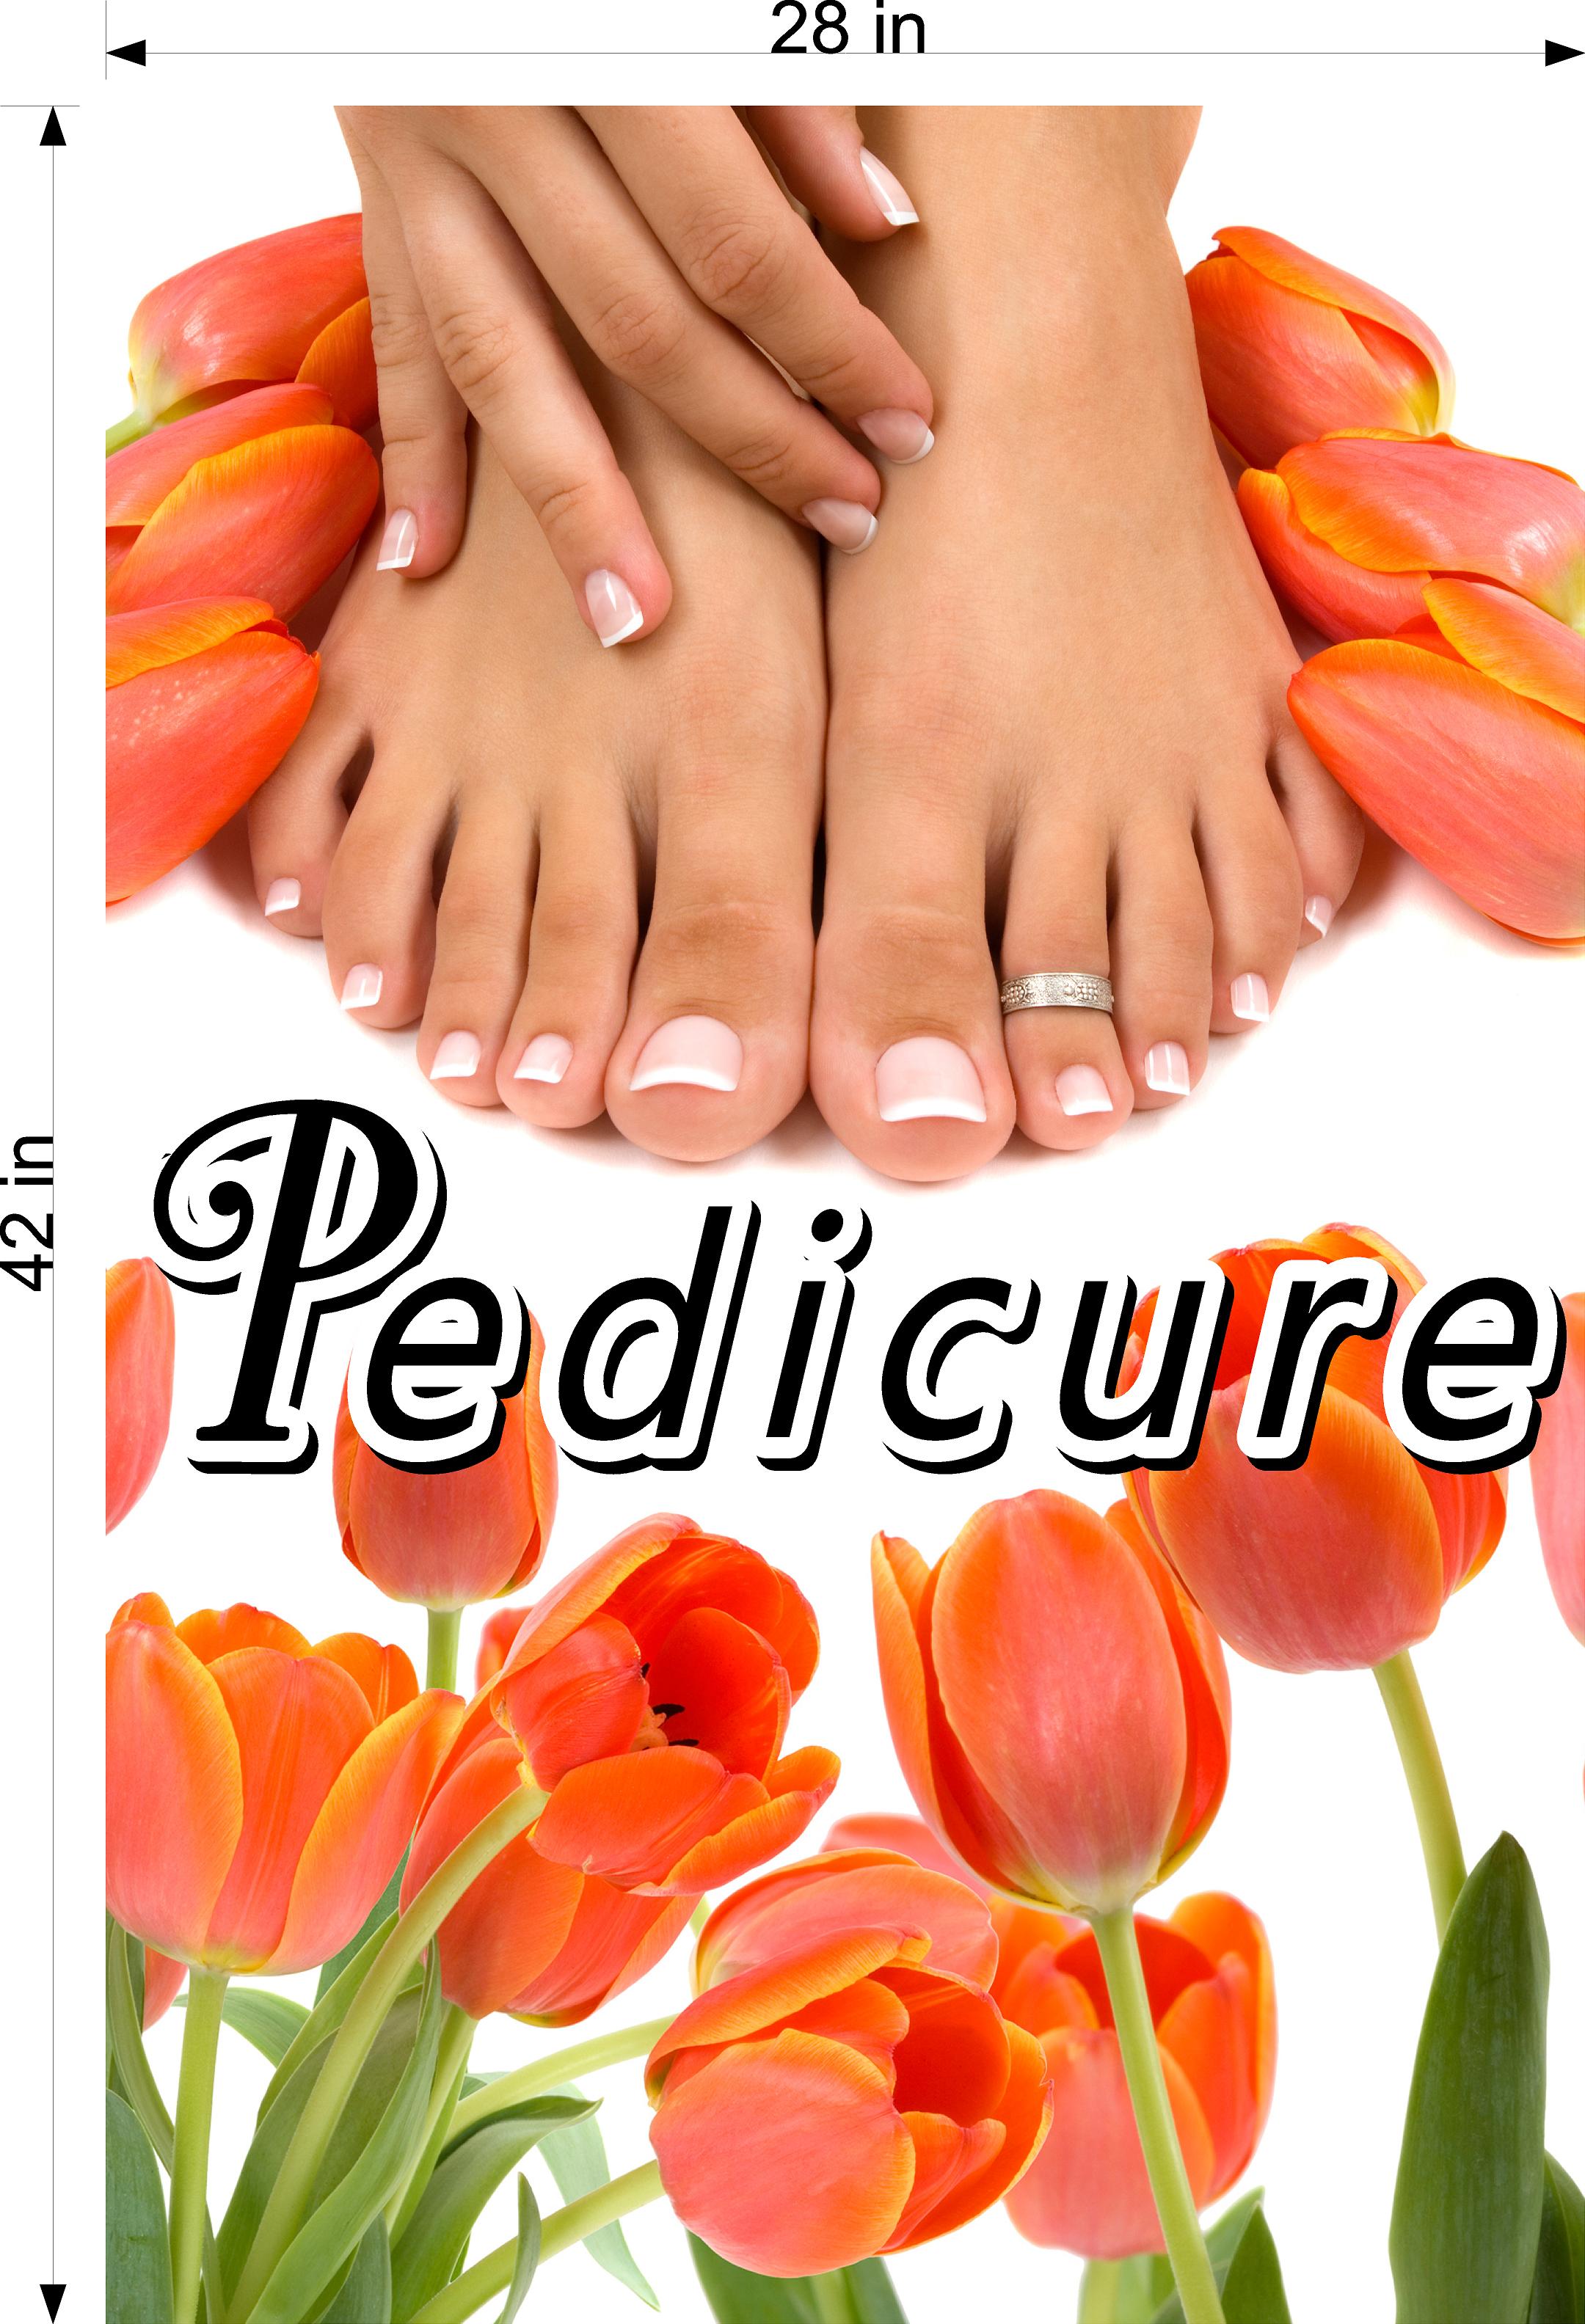 Pedicure 23 Wallpaper Fabric Poster Decal with Adhesive Backing Wall Sticker Decor Indoors Interior Sign Vertical